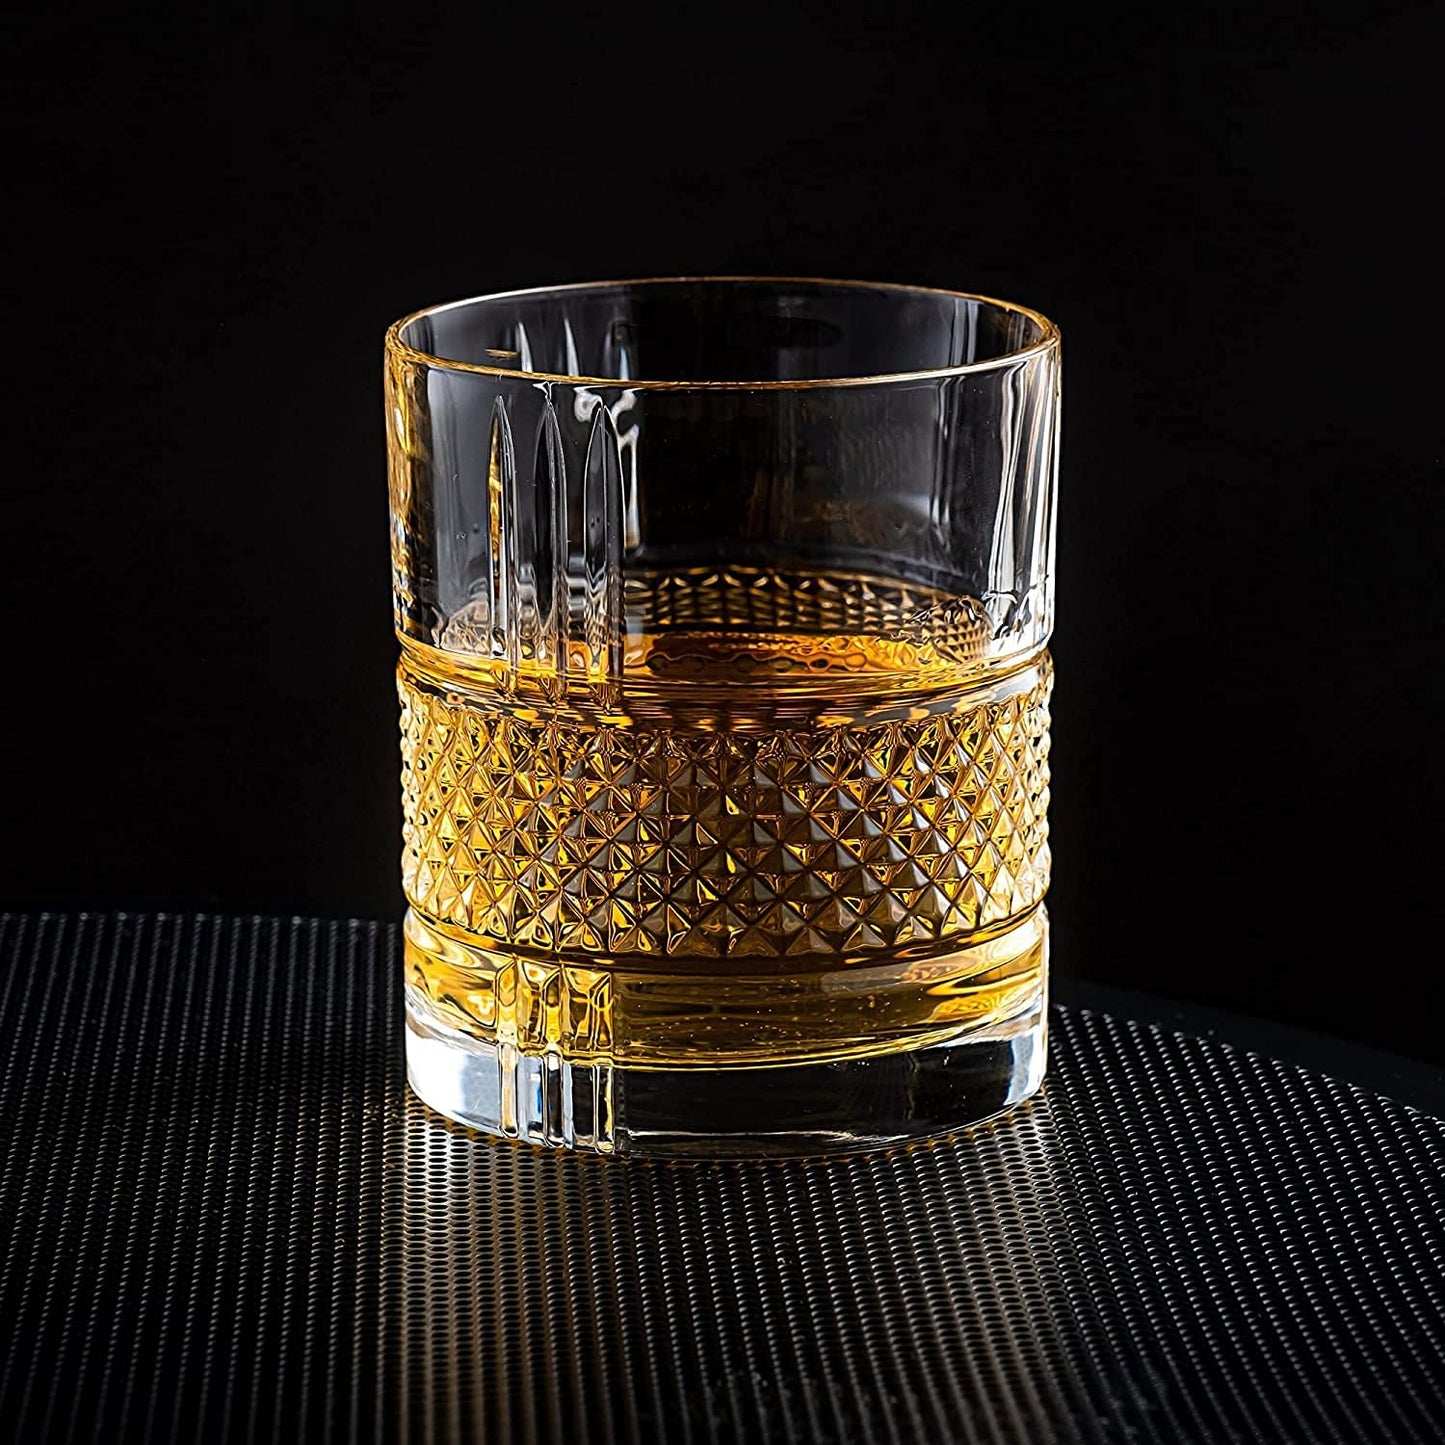 The Connoisseur's Set - Whiskey Stones & Reserve Whiskey Crystal Glass